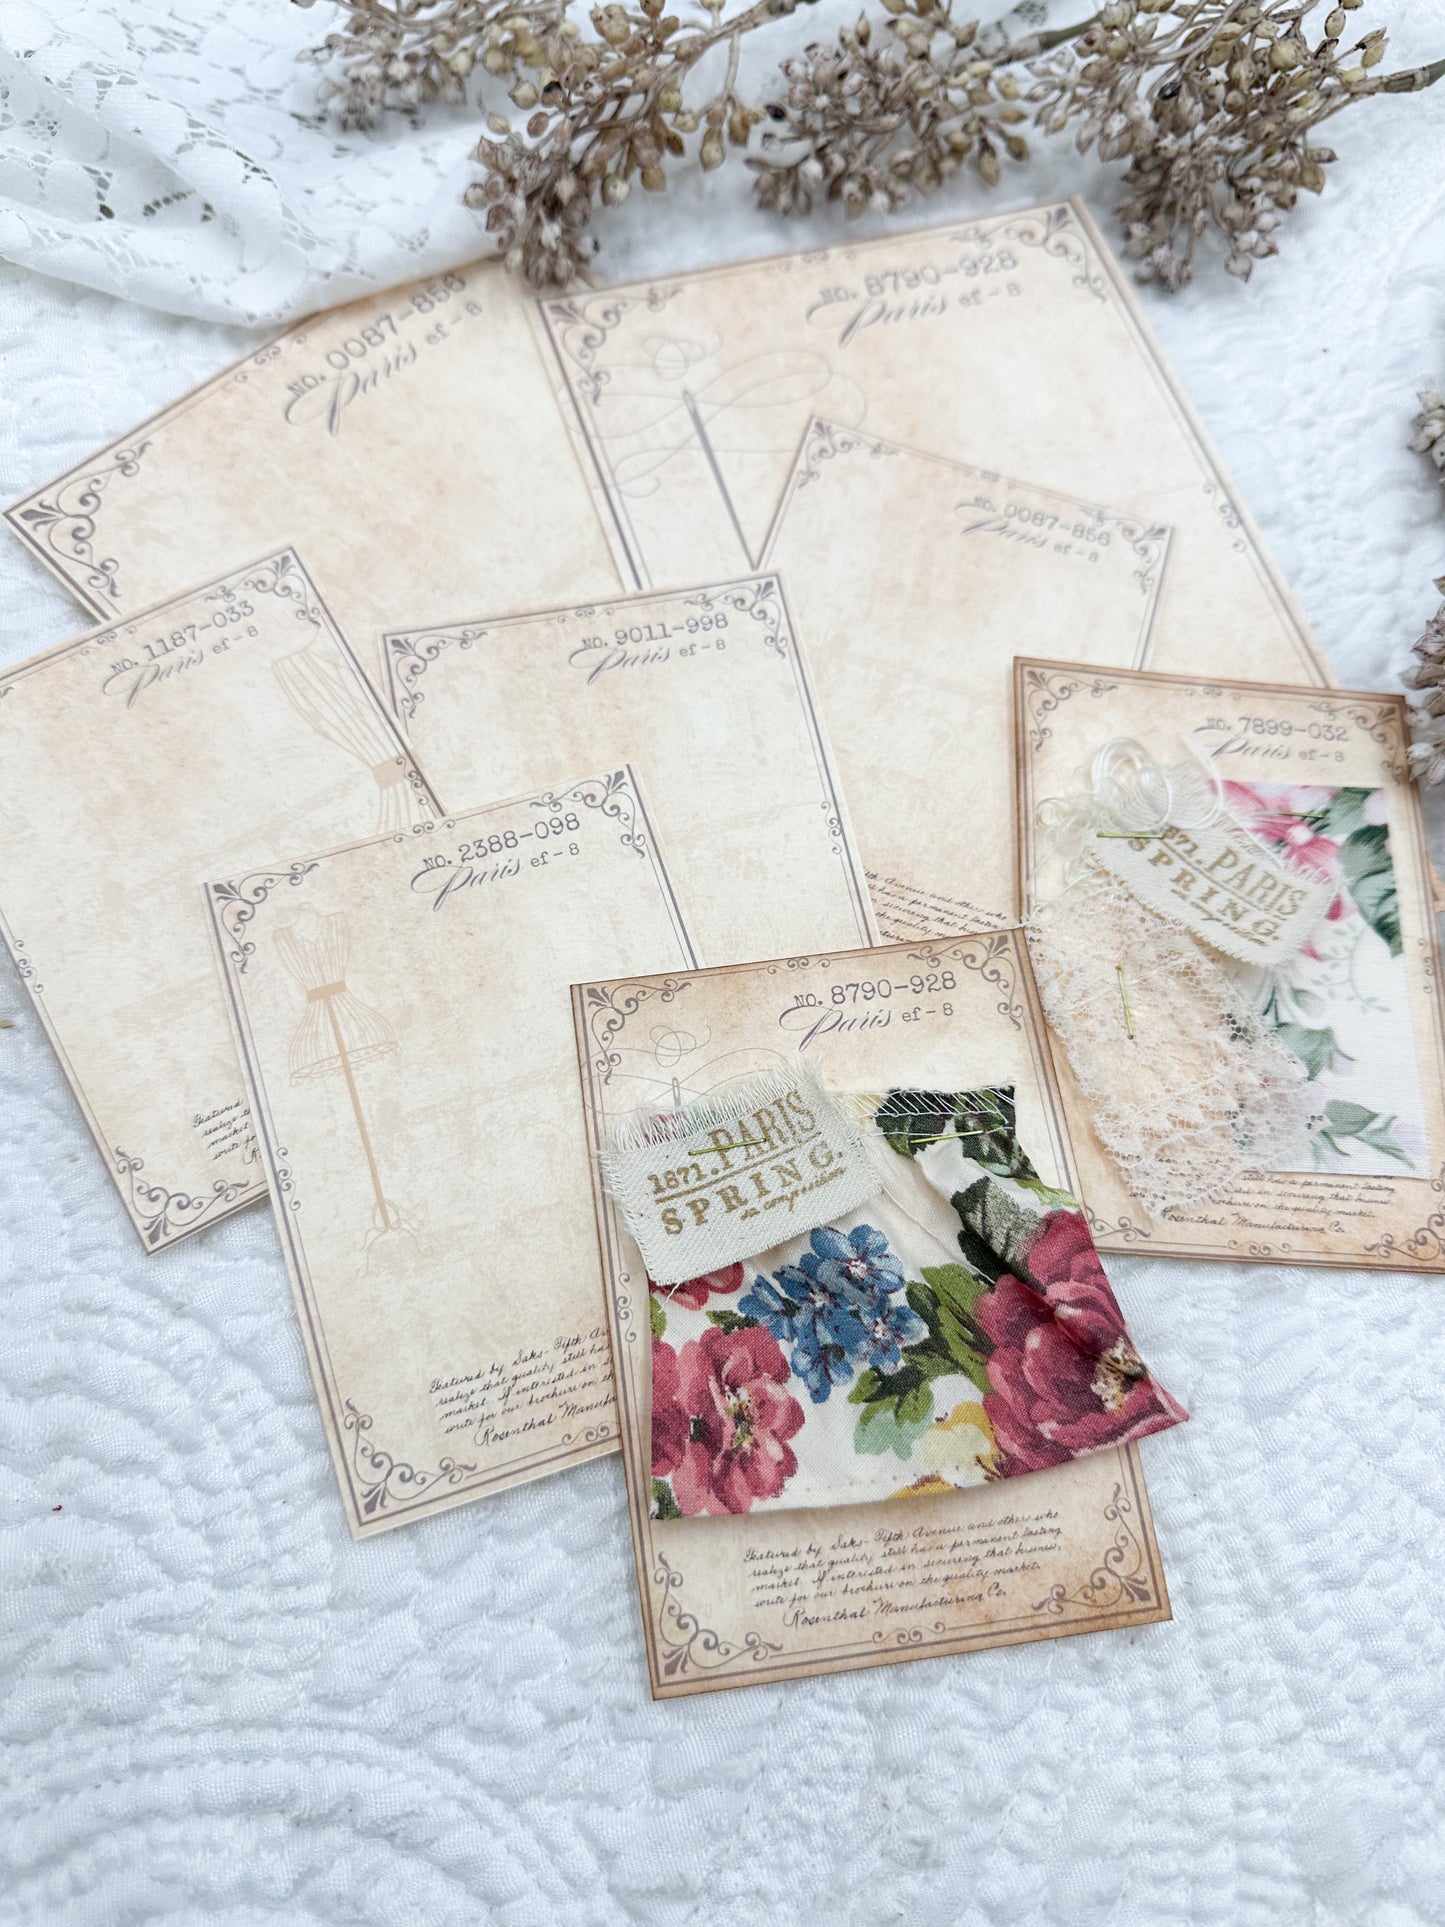 Fabric Sample Cards- Project Template Digital Download